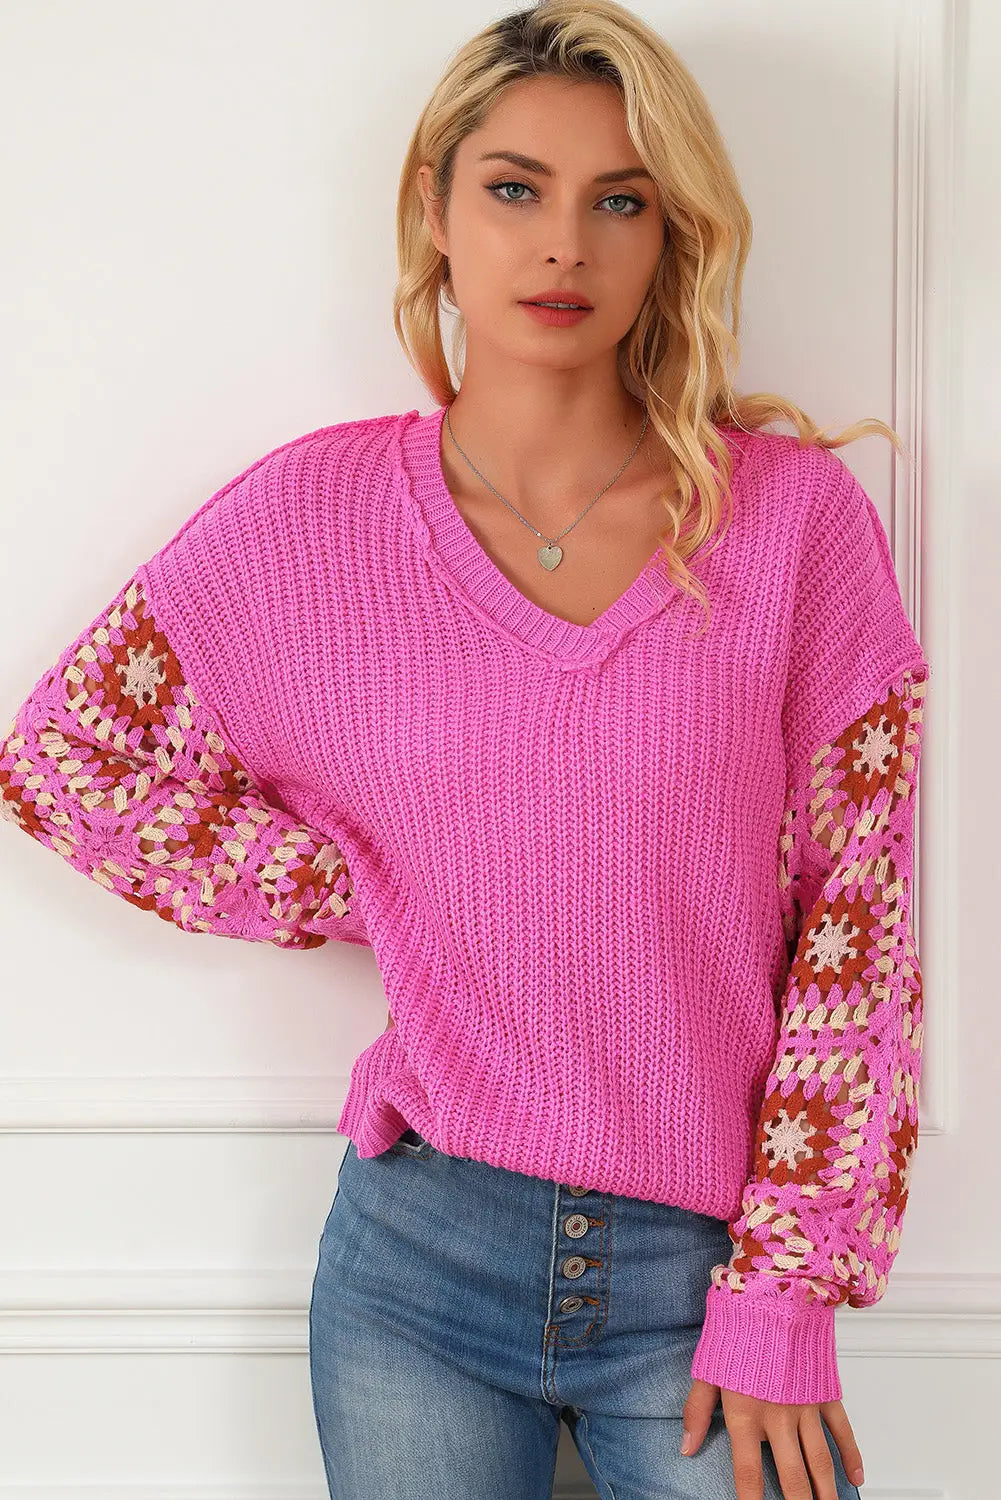 Rose floral crochet cable knit v neck sweater - sweaters & cardigans